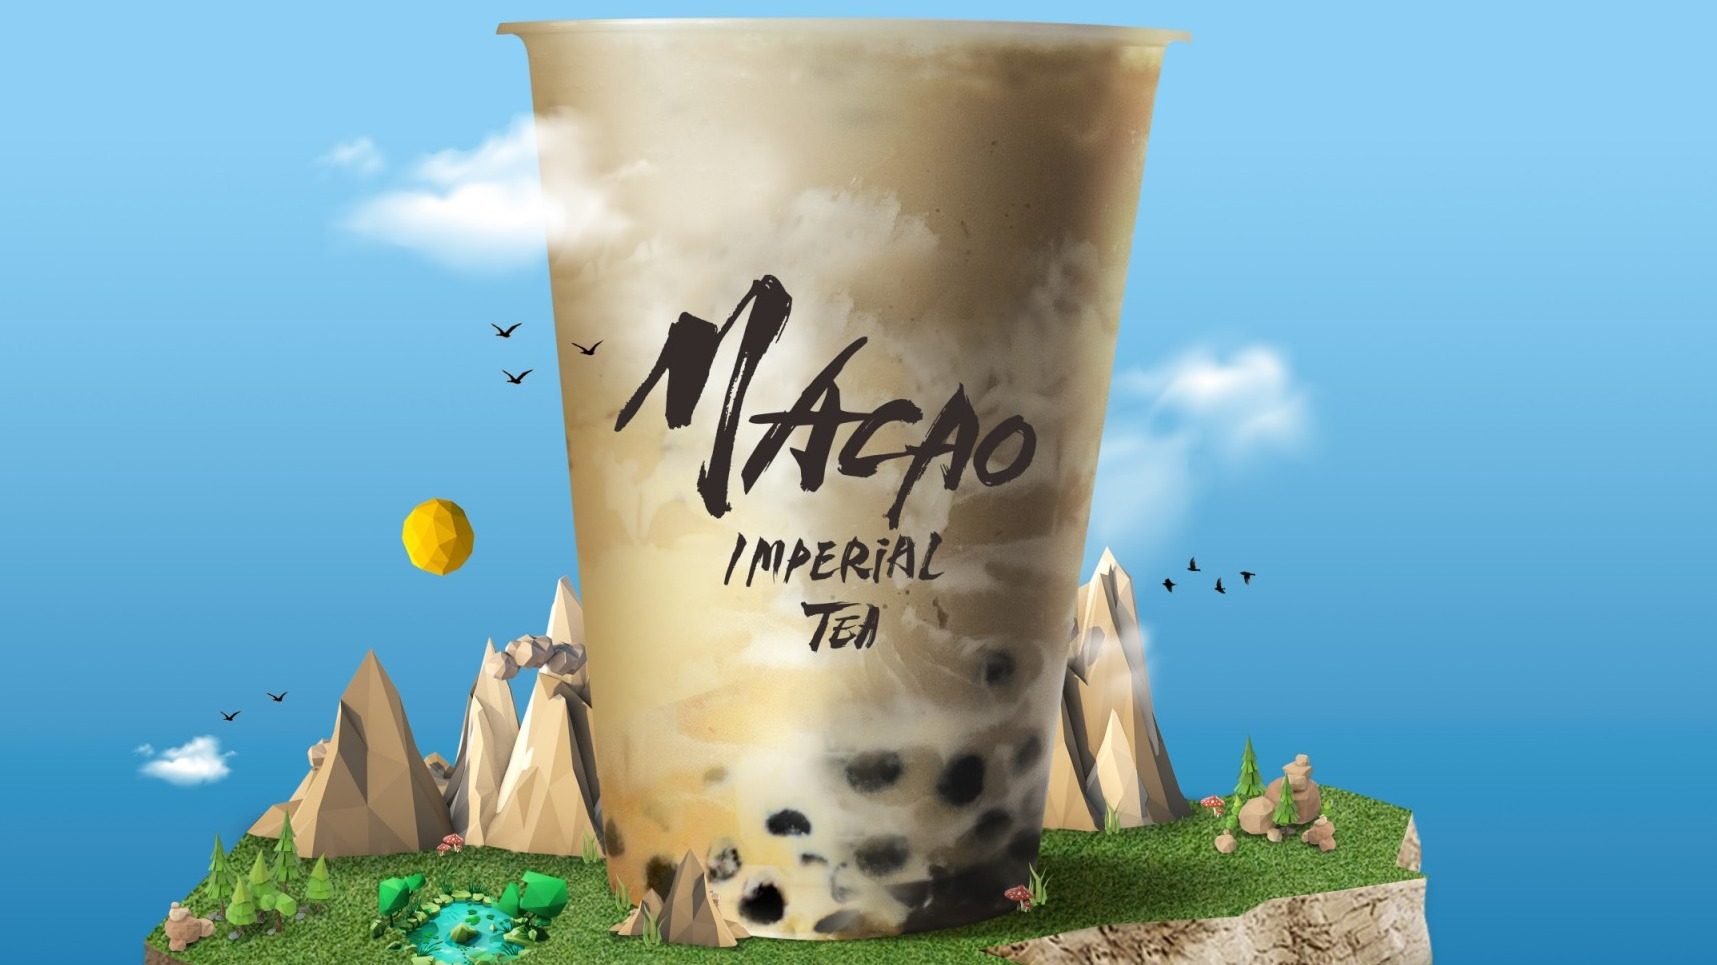 PSA: You can upsize your Macao Imperial Tea drink to 1 liter for free